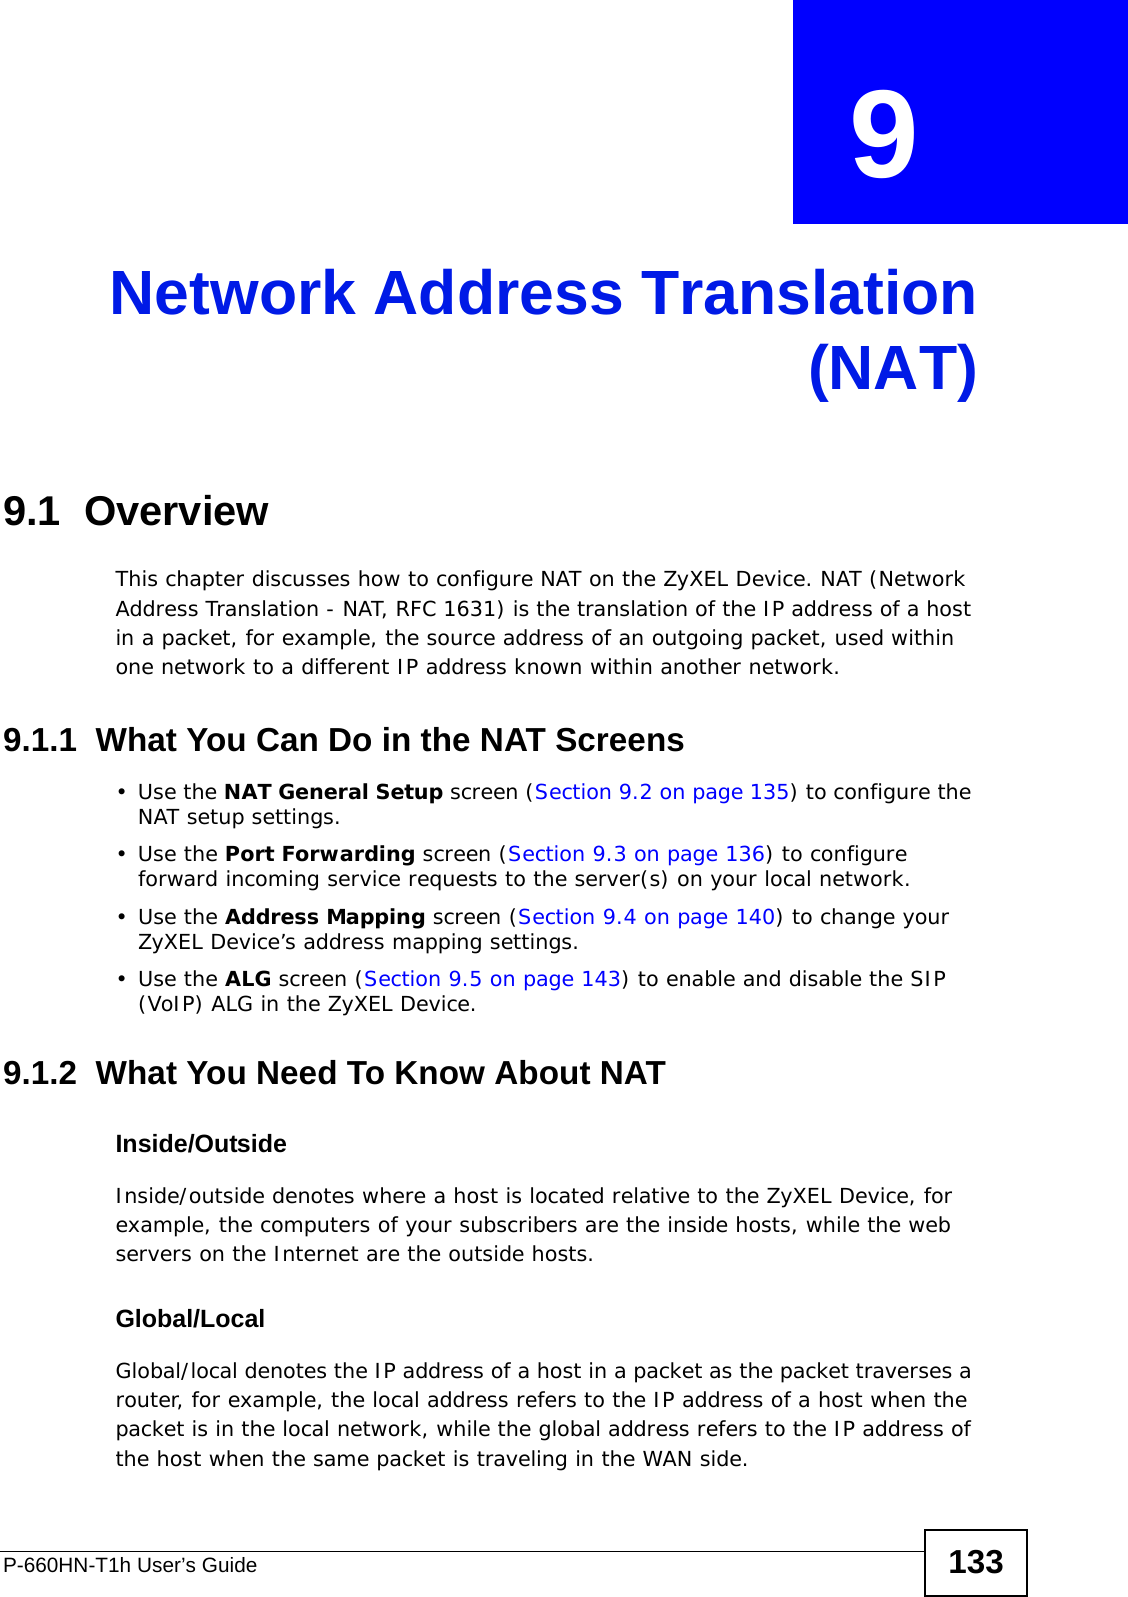 P-660HN-T1h User’s Guide 133CHAPTER  9 Network Address Translation(NAT)9.1  OverviewThis chapter discusses how to configure NAT on the ZyXEL Device. NAT (Network Address Translation - NAT, RFC 1631) is the translation of the IP address of a host in a packet, for example, the source address of an outgoing packet, used within one network to a different IP address known within another network.9.1.1  What You Can Do in the NAT Screens•Use the NAT General Setup screen (Section 9.2 on page 135) to configure the NAT setup settings.•Use the Port Forwarding screen (Section 9.3 on page 136) to configure forward incoming service requests to the server(s) on your local network. •Use the Address Mapping screen (Section 9.4 on page 140) to change your ZyXEL Device’s address mapping settings.•Use the ALG screen (Section 9.5 on page 143) to enable and disable the SIP (VoIP) ALG in the ZyXEL Device.9.1.2  What You Need To Know About NATInside/OutsideInside/outside denotes where a host is located relative to the ZyXEL Device, for example, the computers of your subscribers are the inside hosts, while the web servers on the Internet are the outside hosts. Global/LocalGlobal/local denotes the IP address of a host in a packet as the packet traverses a router, for example, the local address refers to the IP address of a host when the packet is in the local network, while the global address refers to the IP address of the host when the same packet is traveling in the WAN side. 